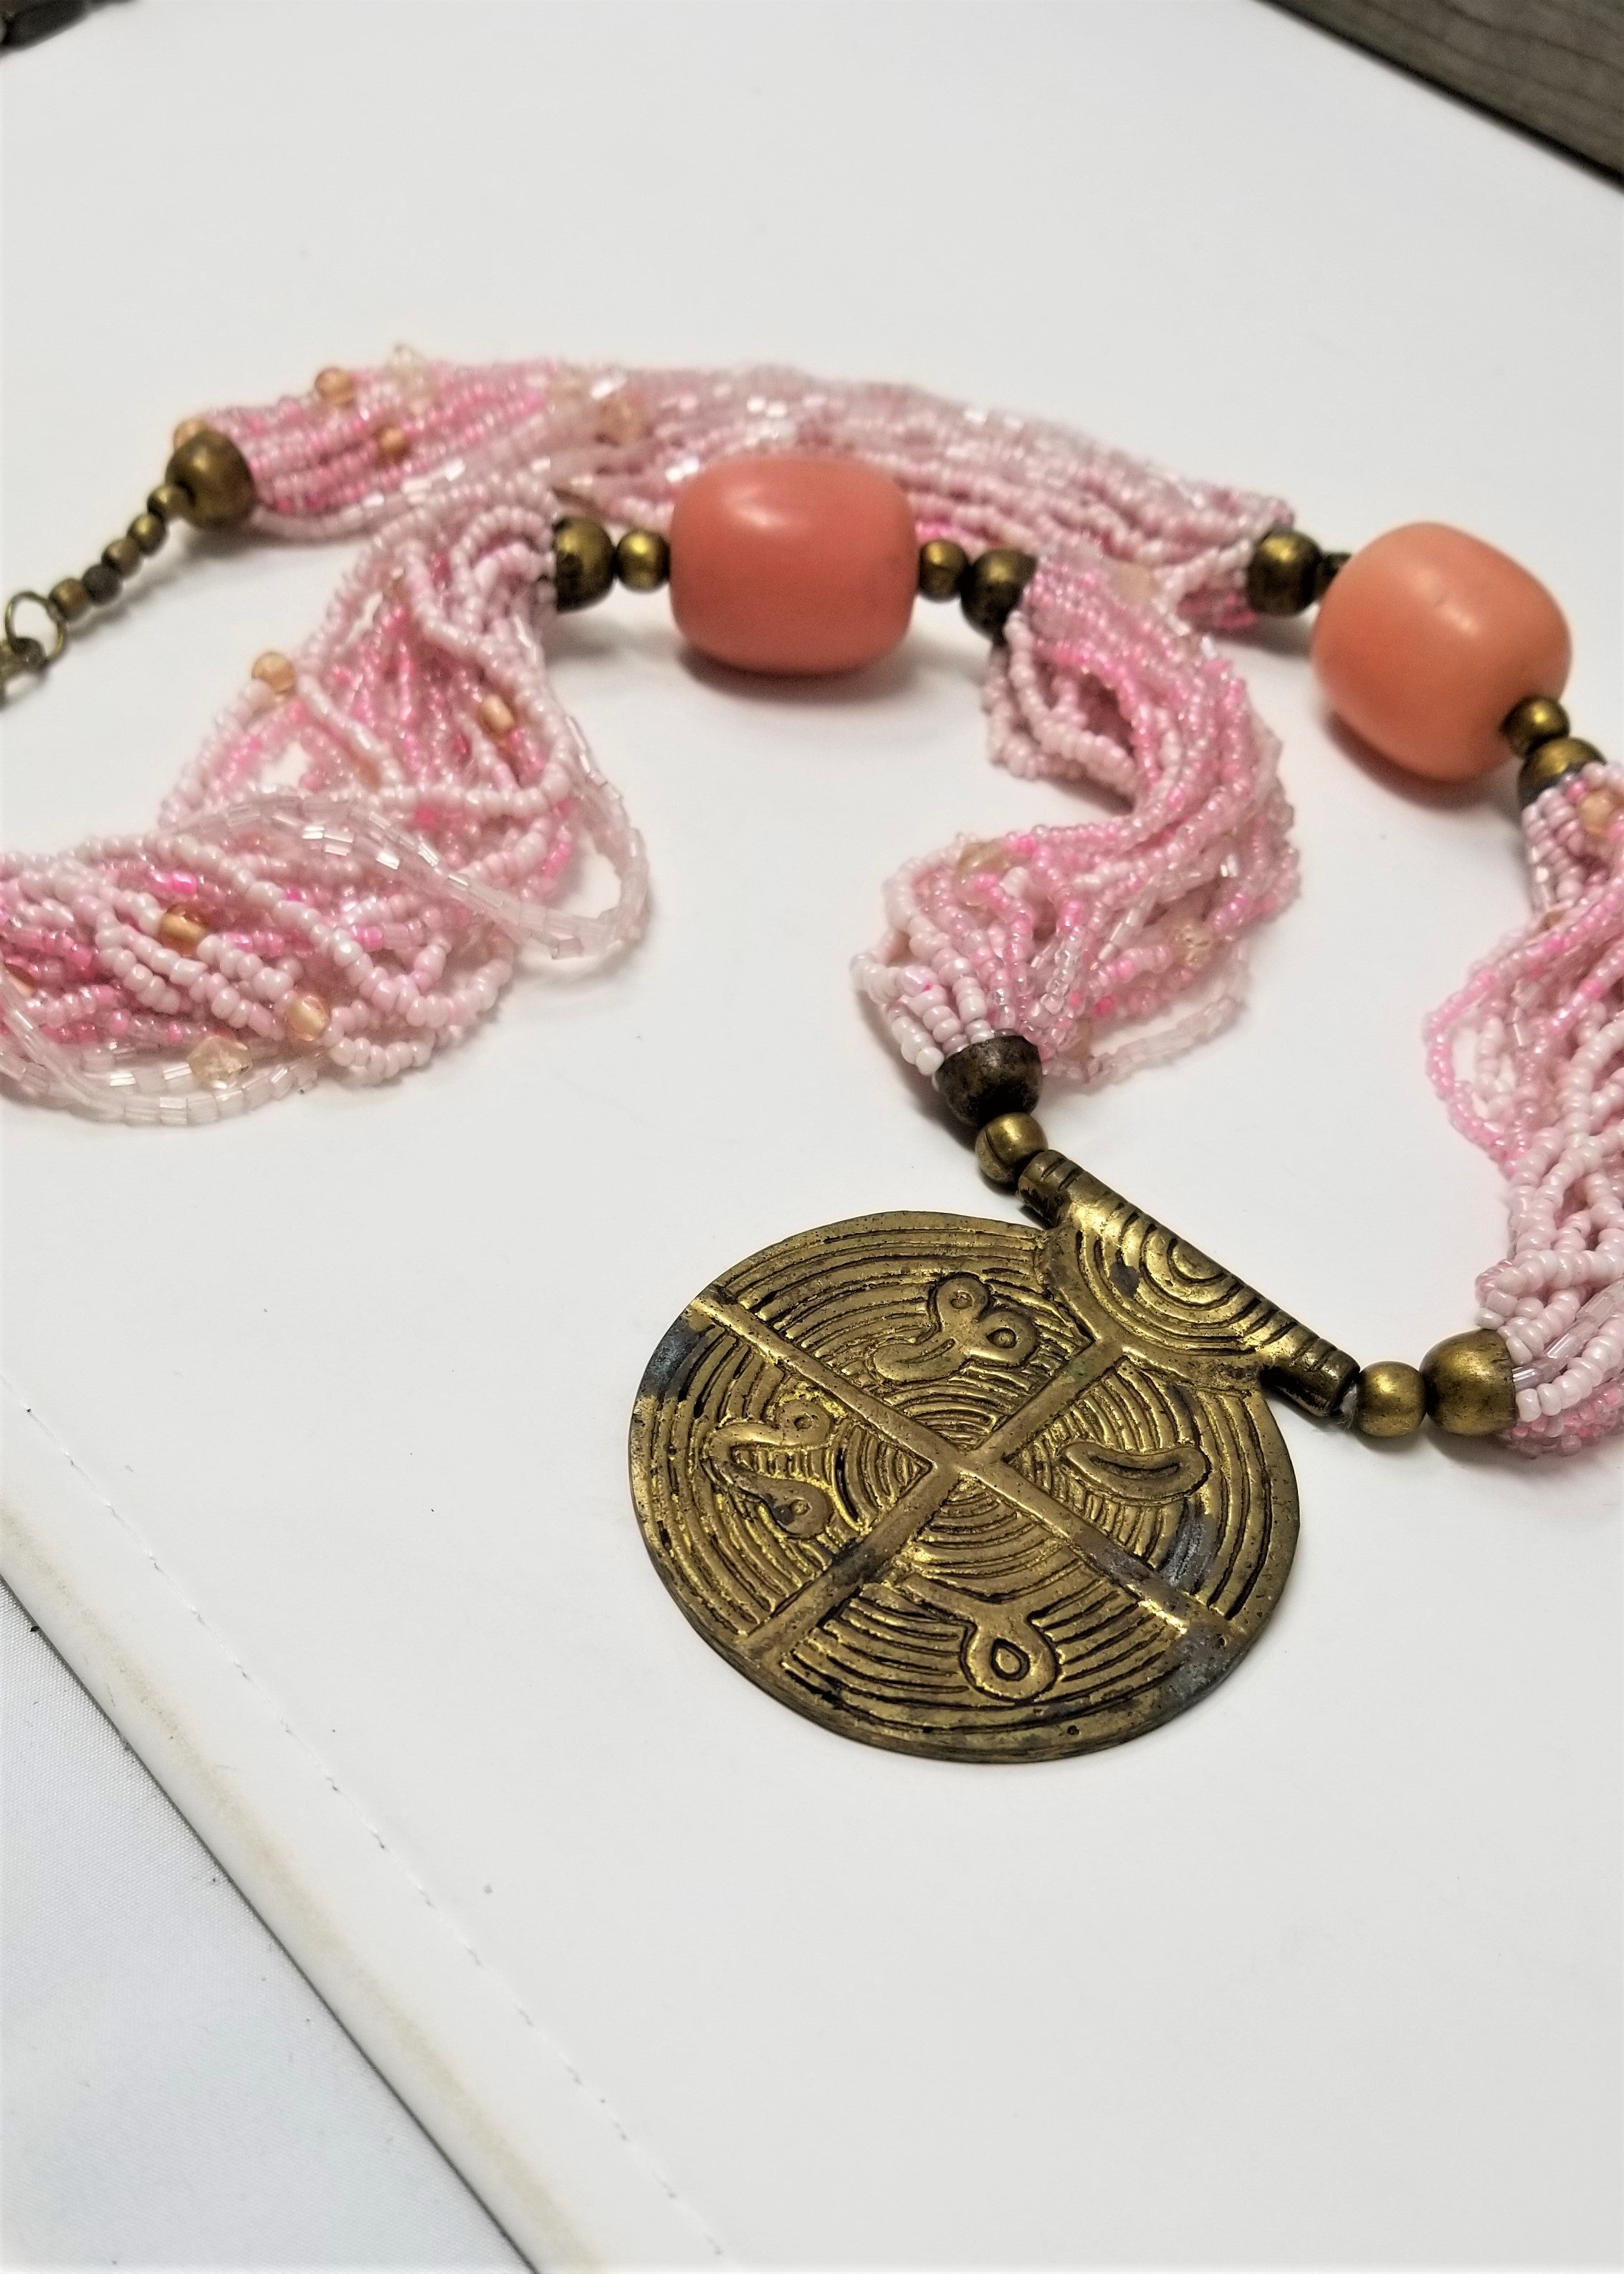 Stunning Pink Beaded Necklace w Brass Accent